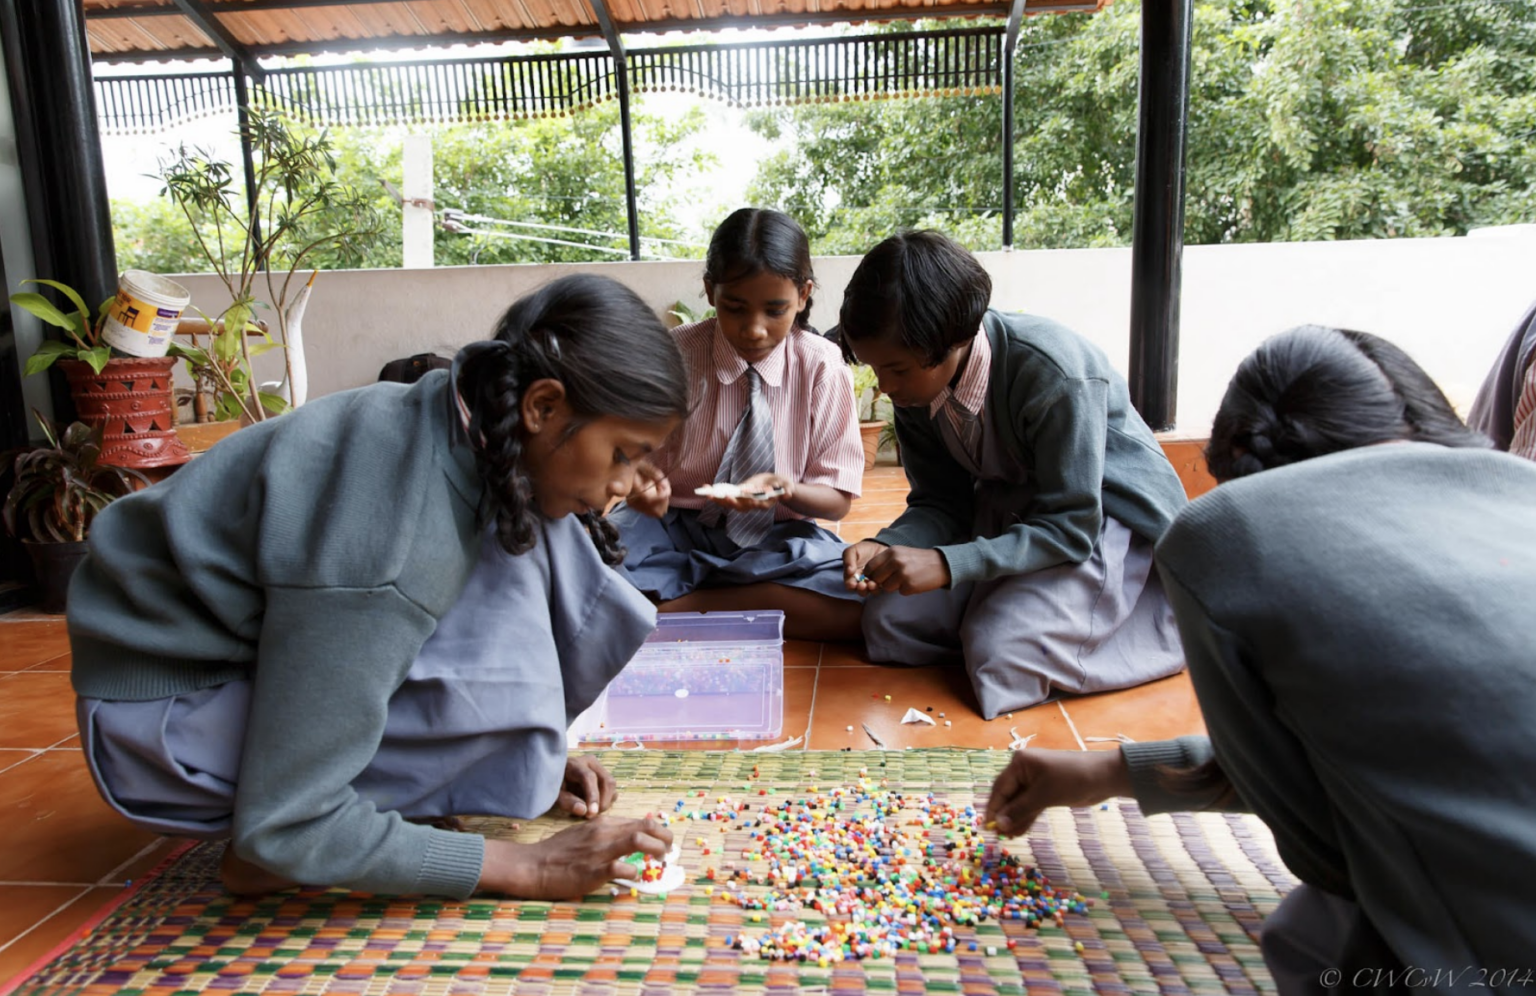 In the foreground we see Nandhita who sadly passed away in 2016. She was chronically sick and loved our creative activities and was also very good at it. In the picture above she was creative with beads.